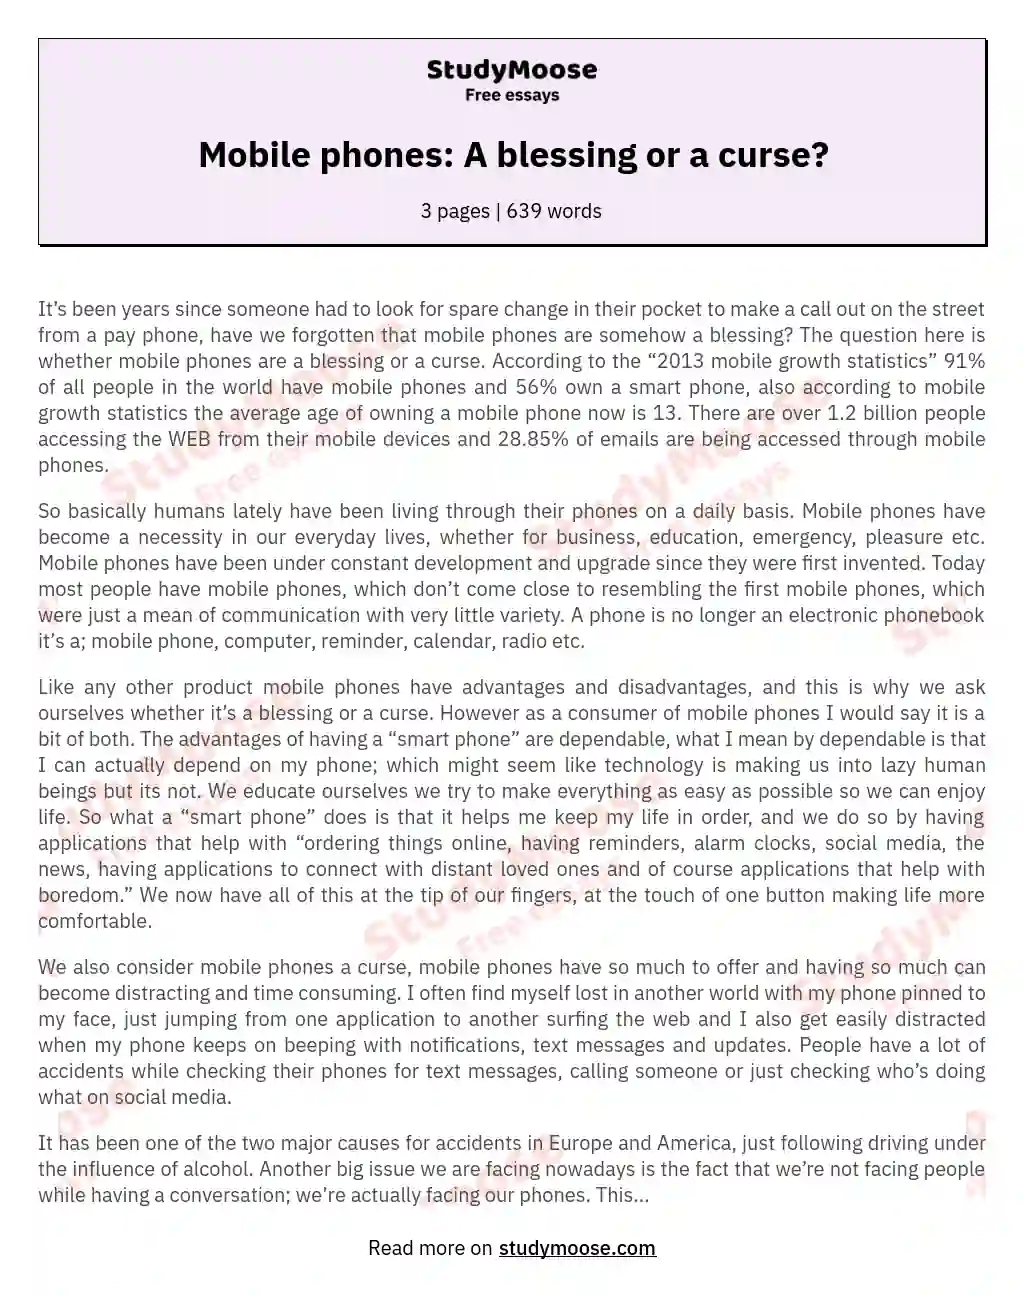 Mobile phones: A blessing or a curse? essay